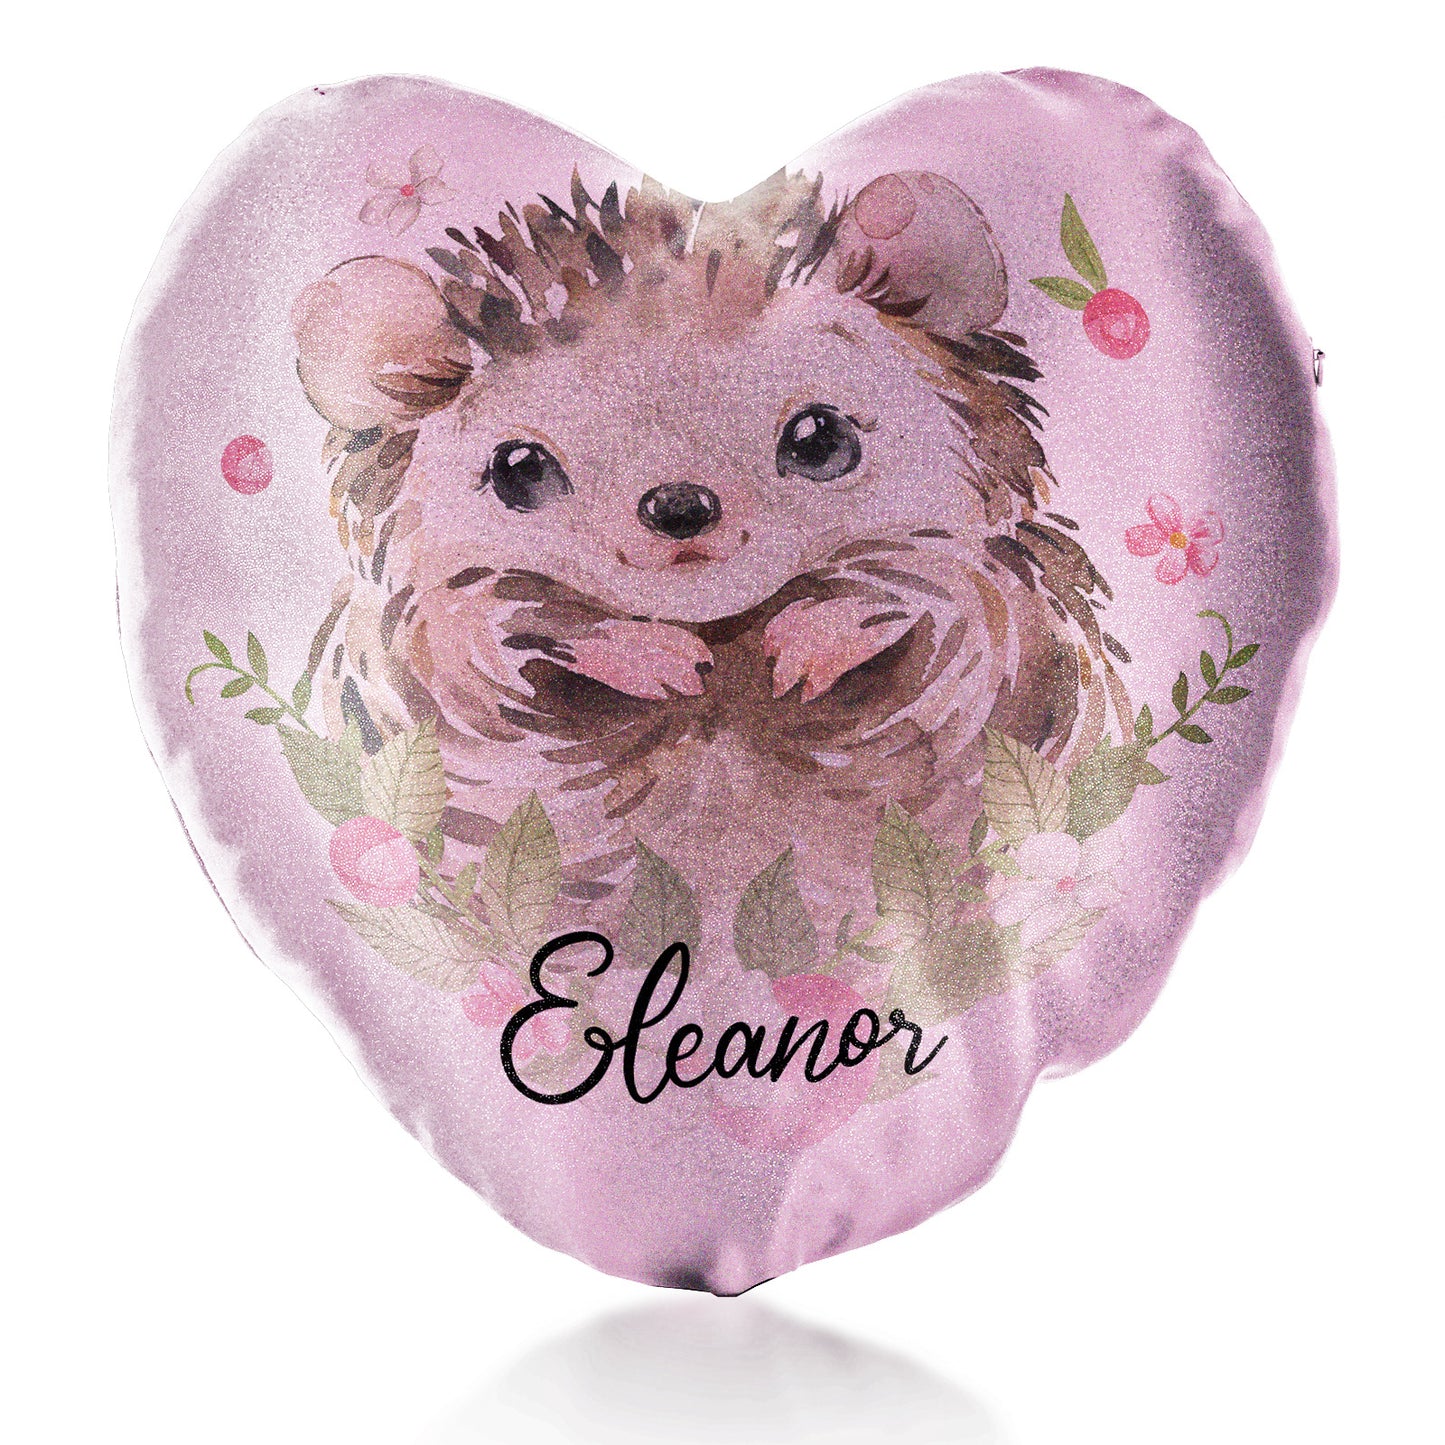 Personalised Glitter Heart Cushion with Hedgehog Pink Flowers and Cute Text